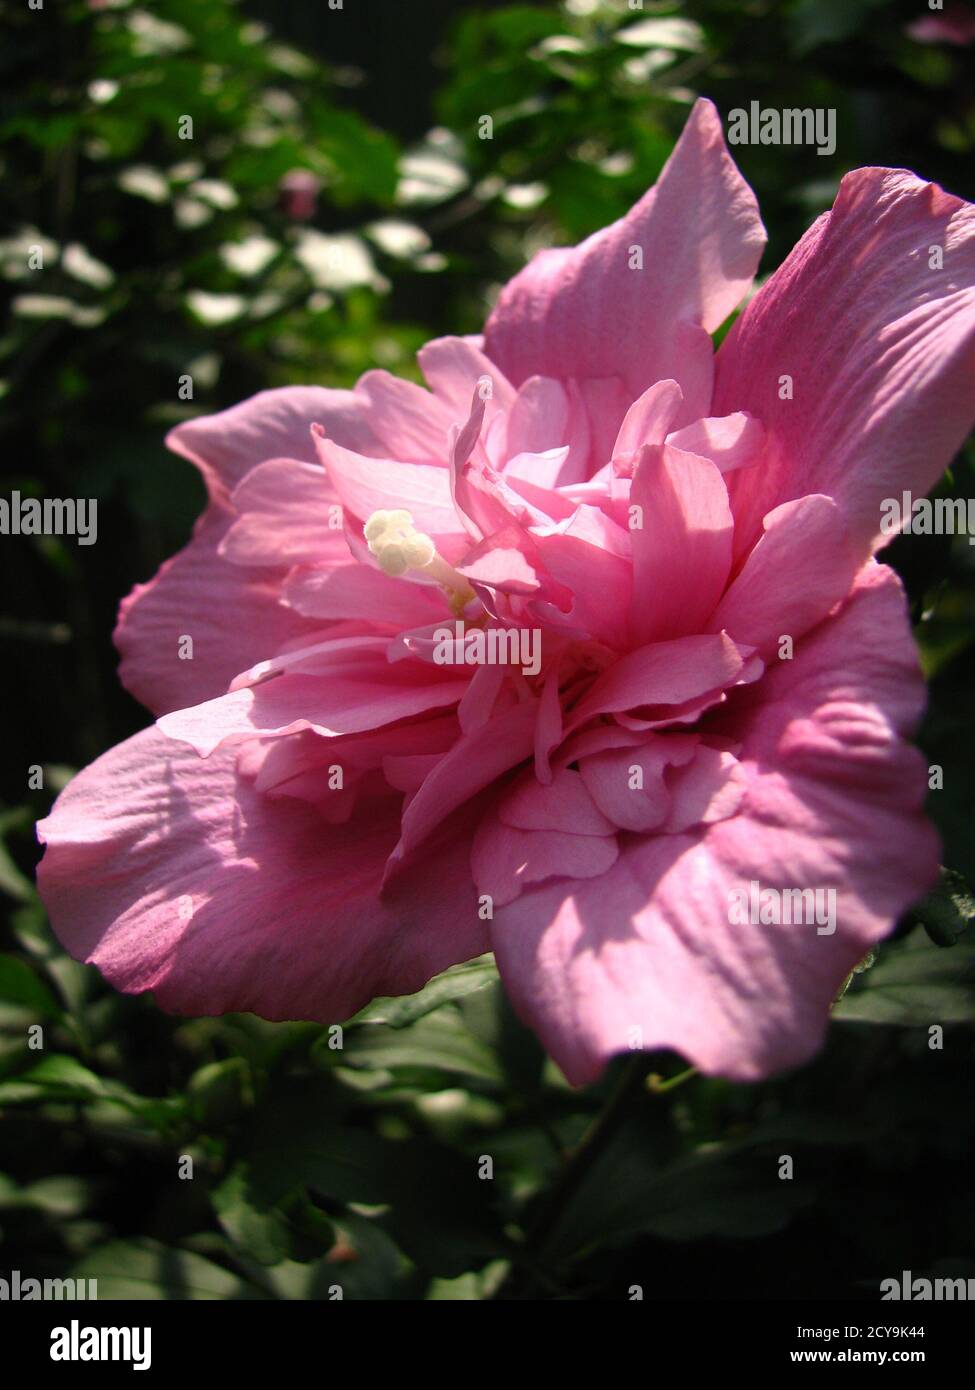 Closeup of a 'Hibiscus syriacus 'Ardens' ', double-flowered plant Stock Photo